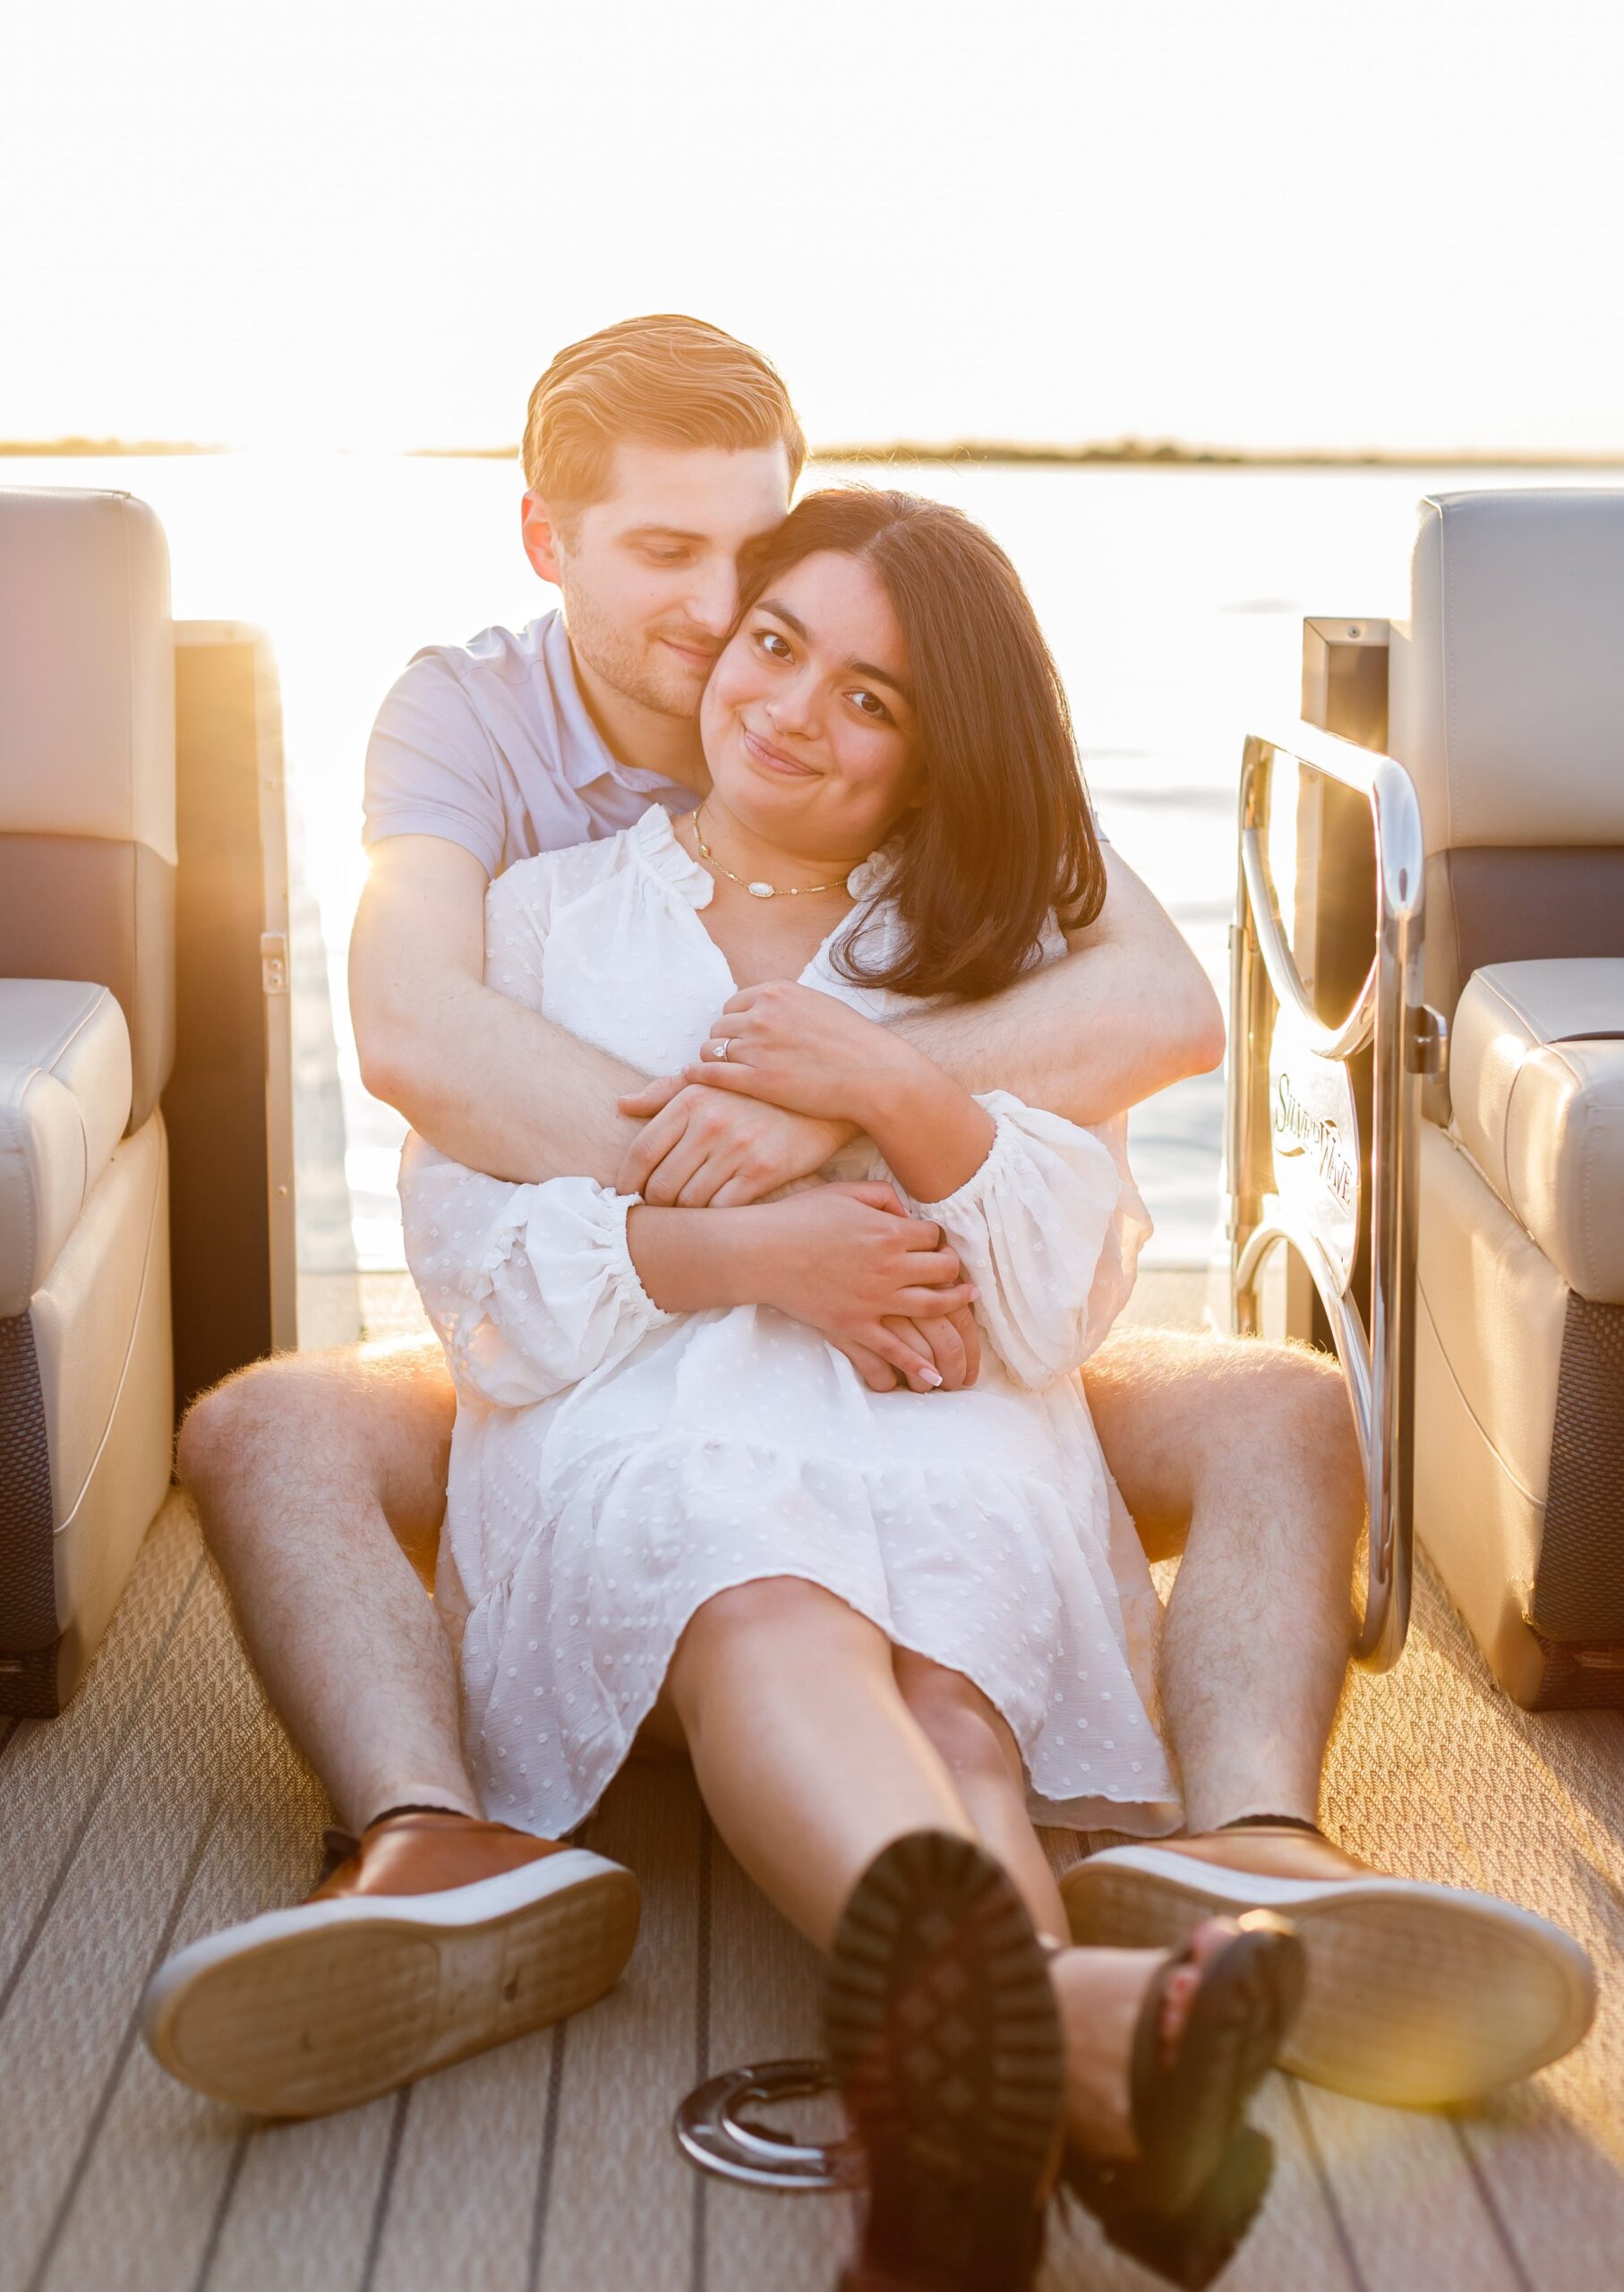 Boat ride engagement photography at the beautiful lakeside in Dallas